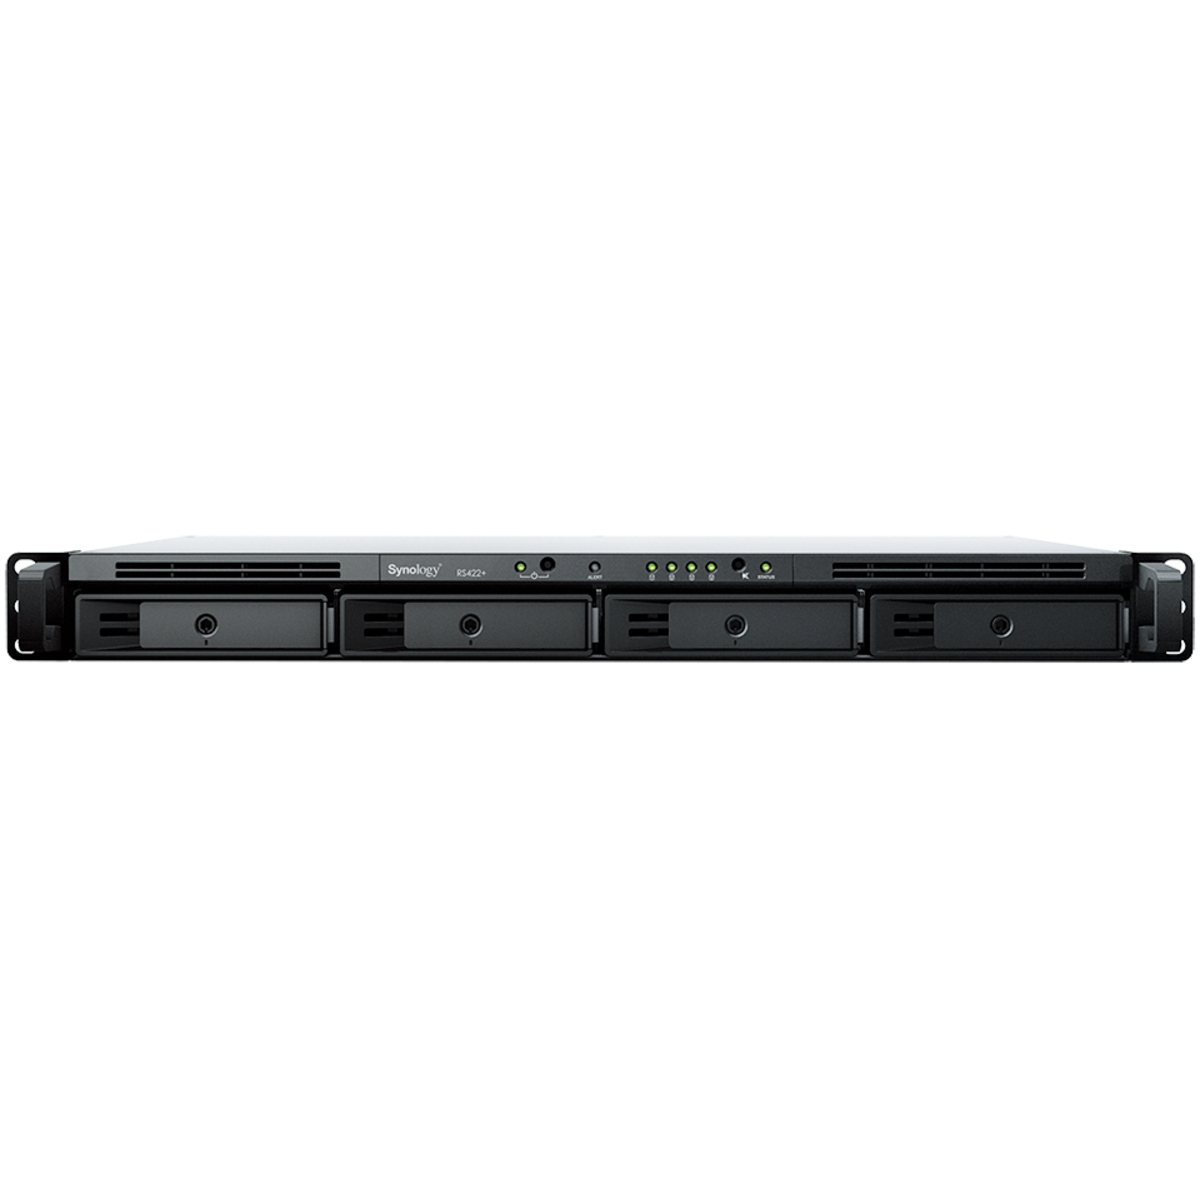 buy Synology RackStation RS422+ 32tb RackMount NAS - Network Attached Storage Device 4x8000gb Samsung 870 QVO MZ-77Q8T0 2.5 560/530MB/s SATA 6Gb/s SSD CONSUMER Class Drives Installed - Burn-In Tested - nas headquarters buy network attached storage server device das new raid-5 free shipping simply usa christmas holiday black friday cyber monday week sale happening now! RackStation RS422+